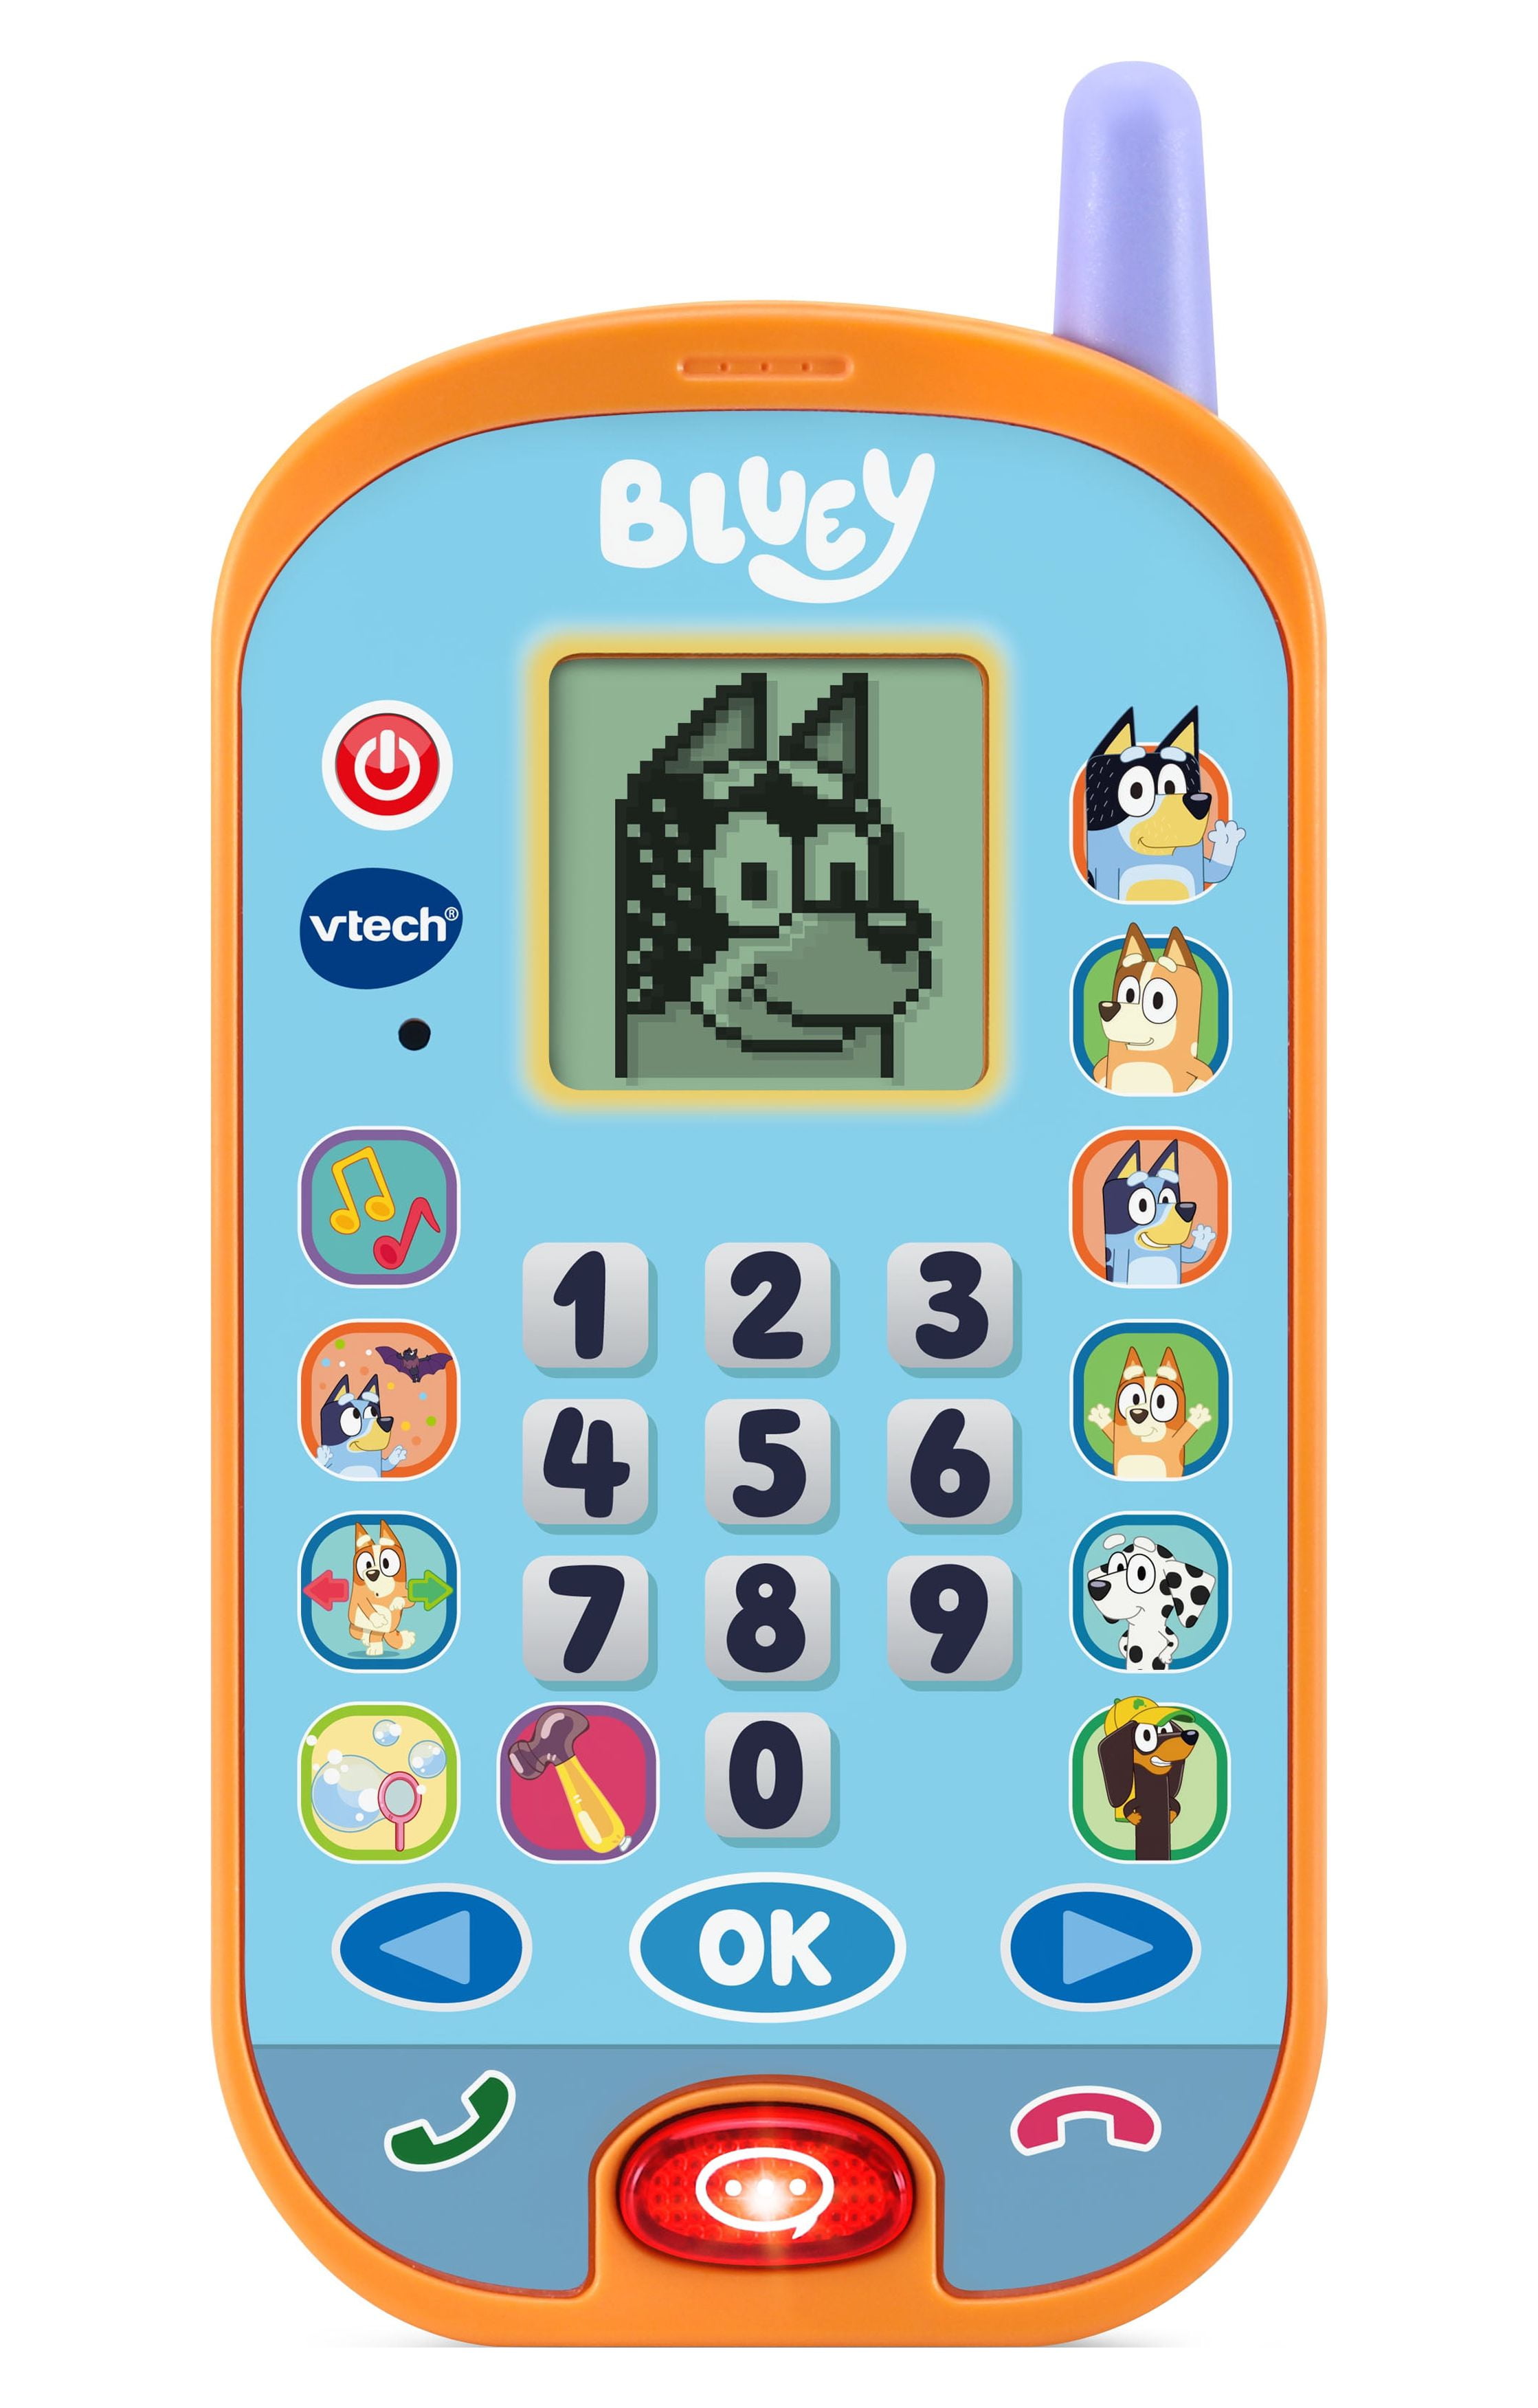 VTech® Bluey Ring Ring Phone With Pretend Phone Apps, Games and Voice Activation